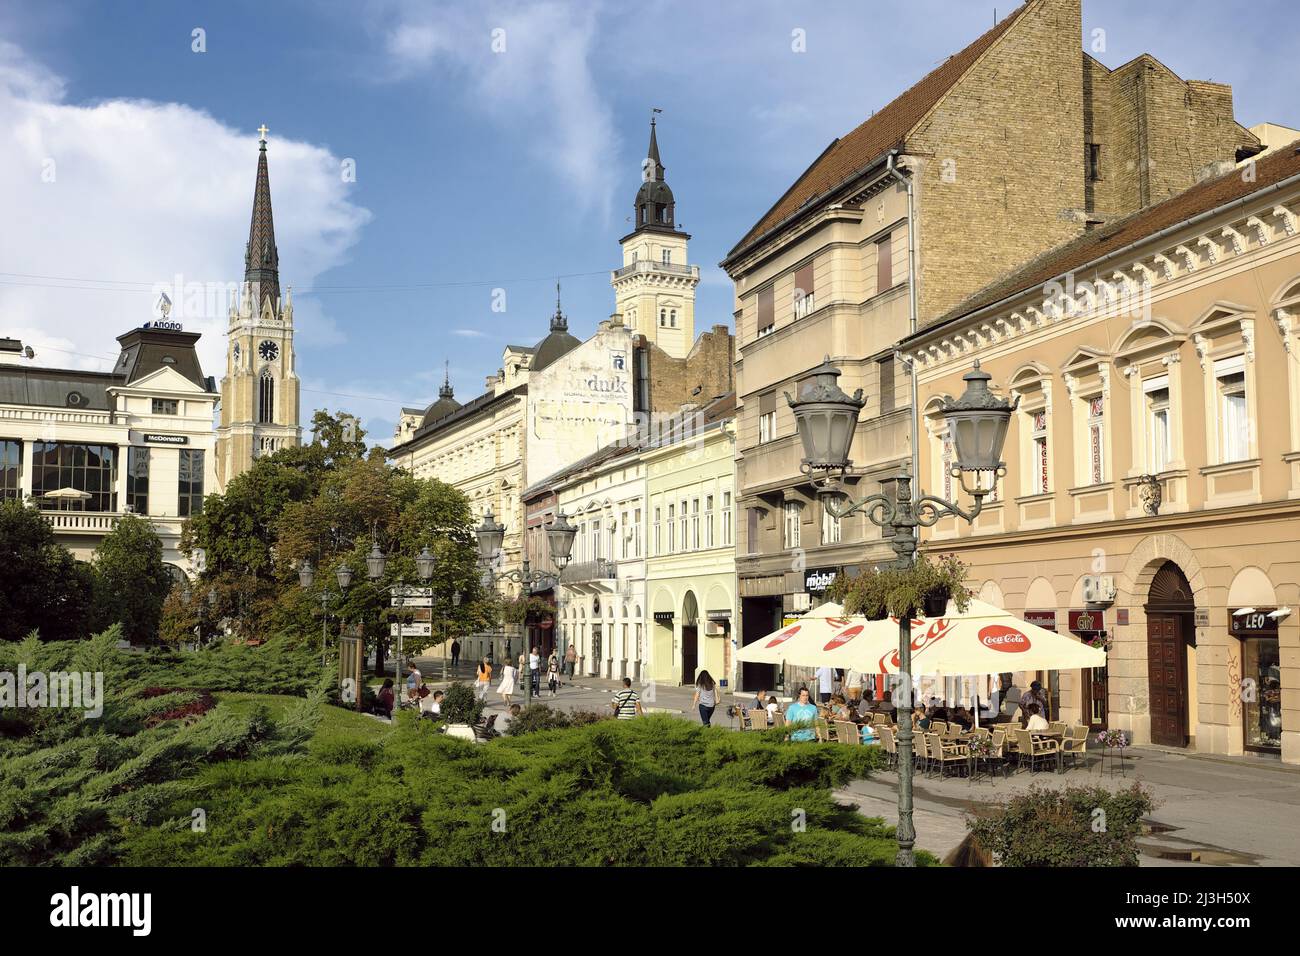 NOVI SAD, SERBIA - JULY 23, 2018: people in the cafe and restaurants of central pedestrian street Stock Photo